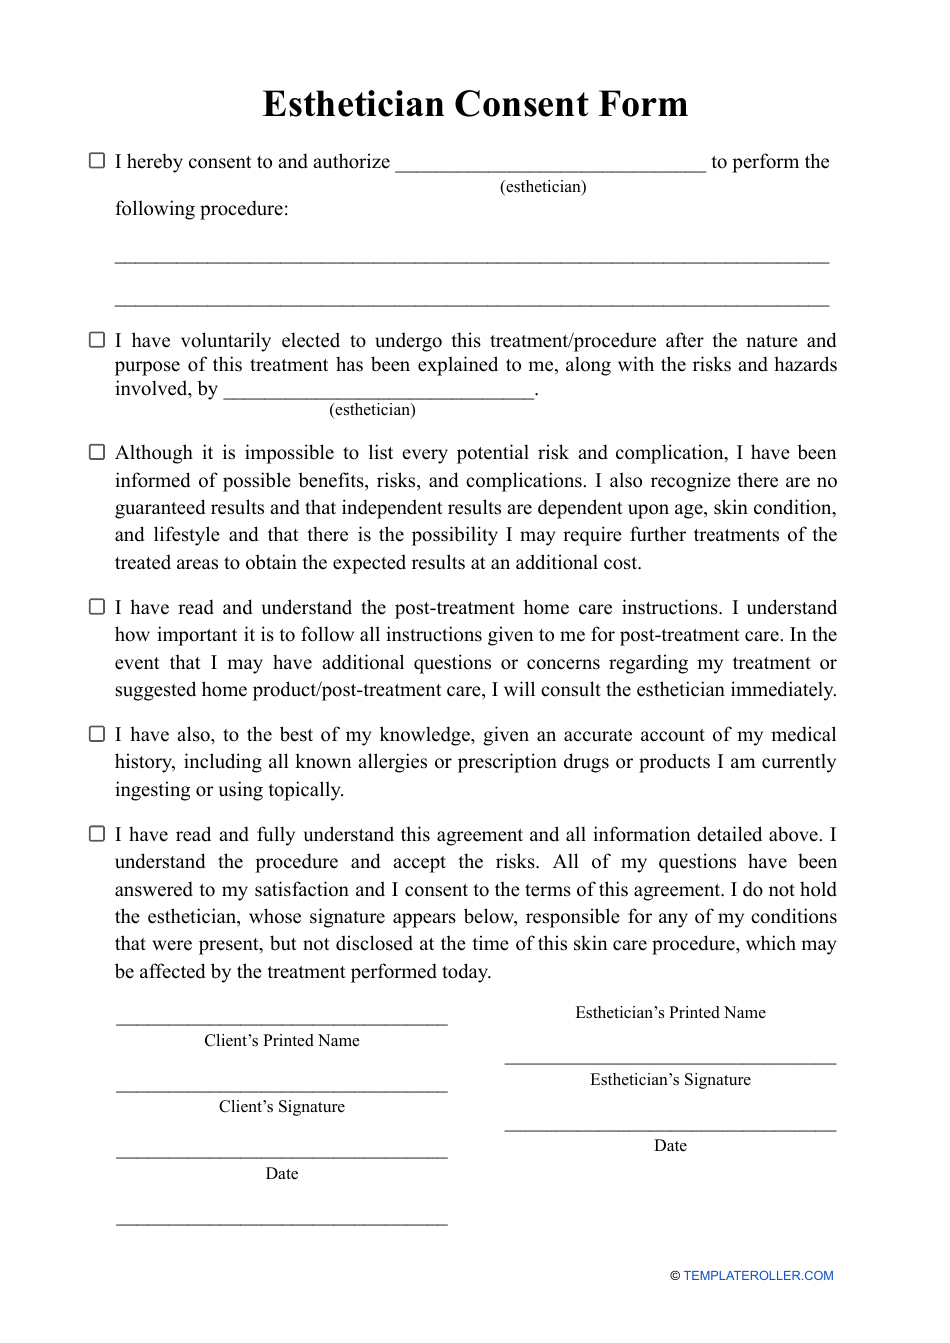 Esthetician Consent Form, Page 1